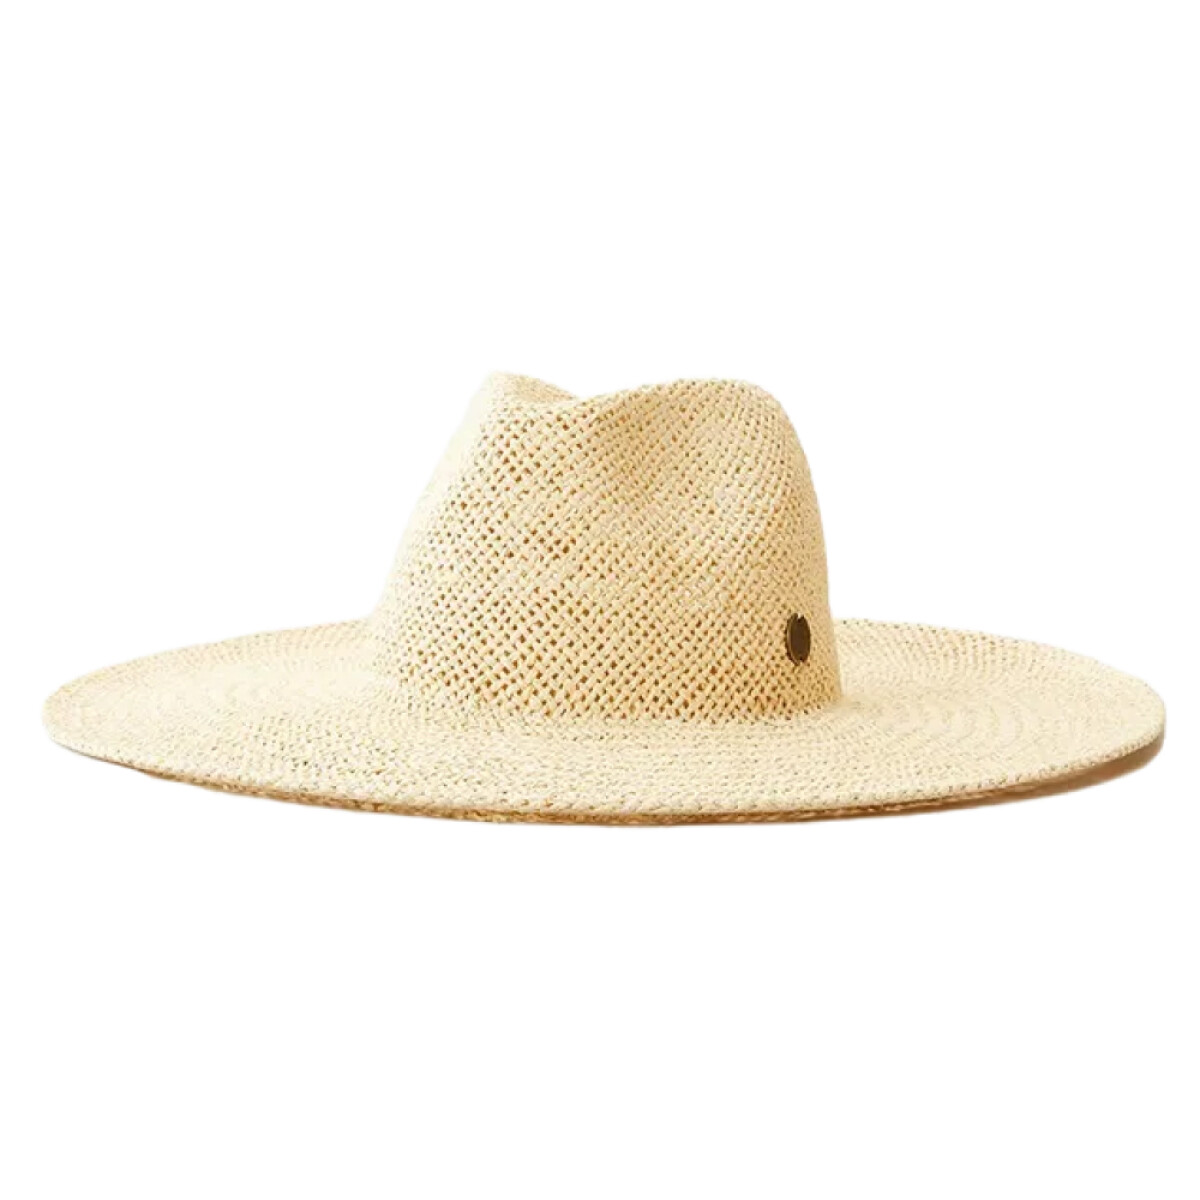 Sombrero Rip Curl Surf Treehouse - Natural 